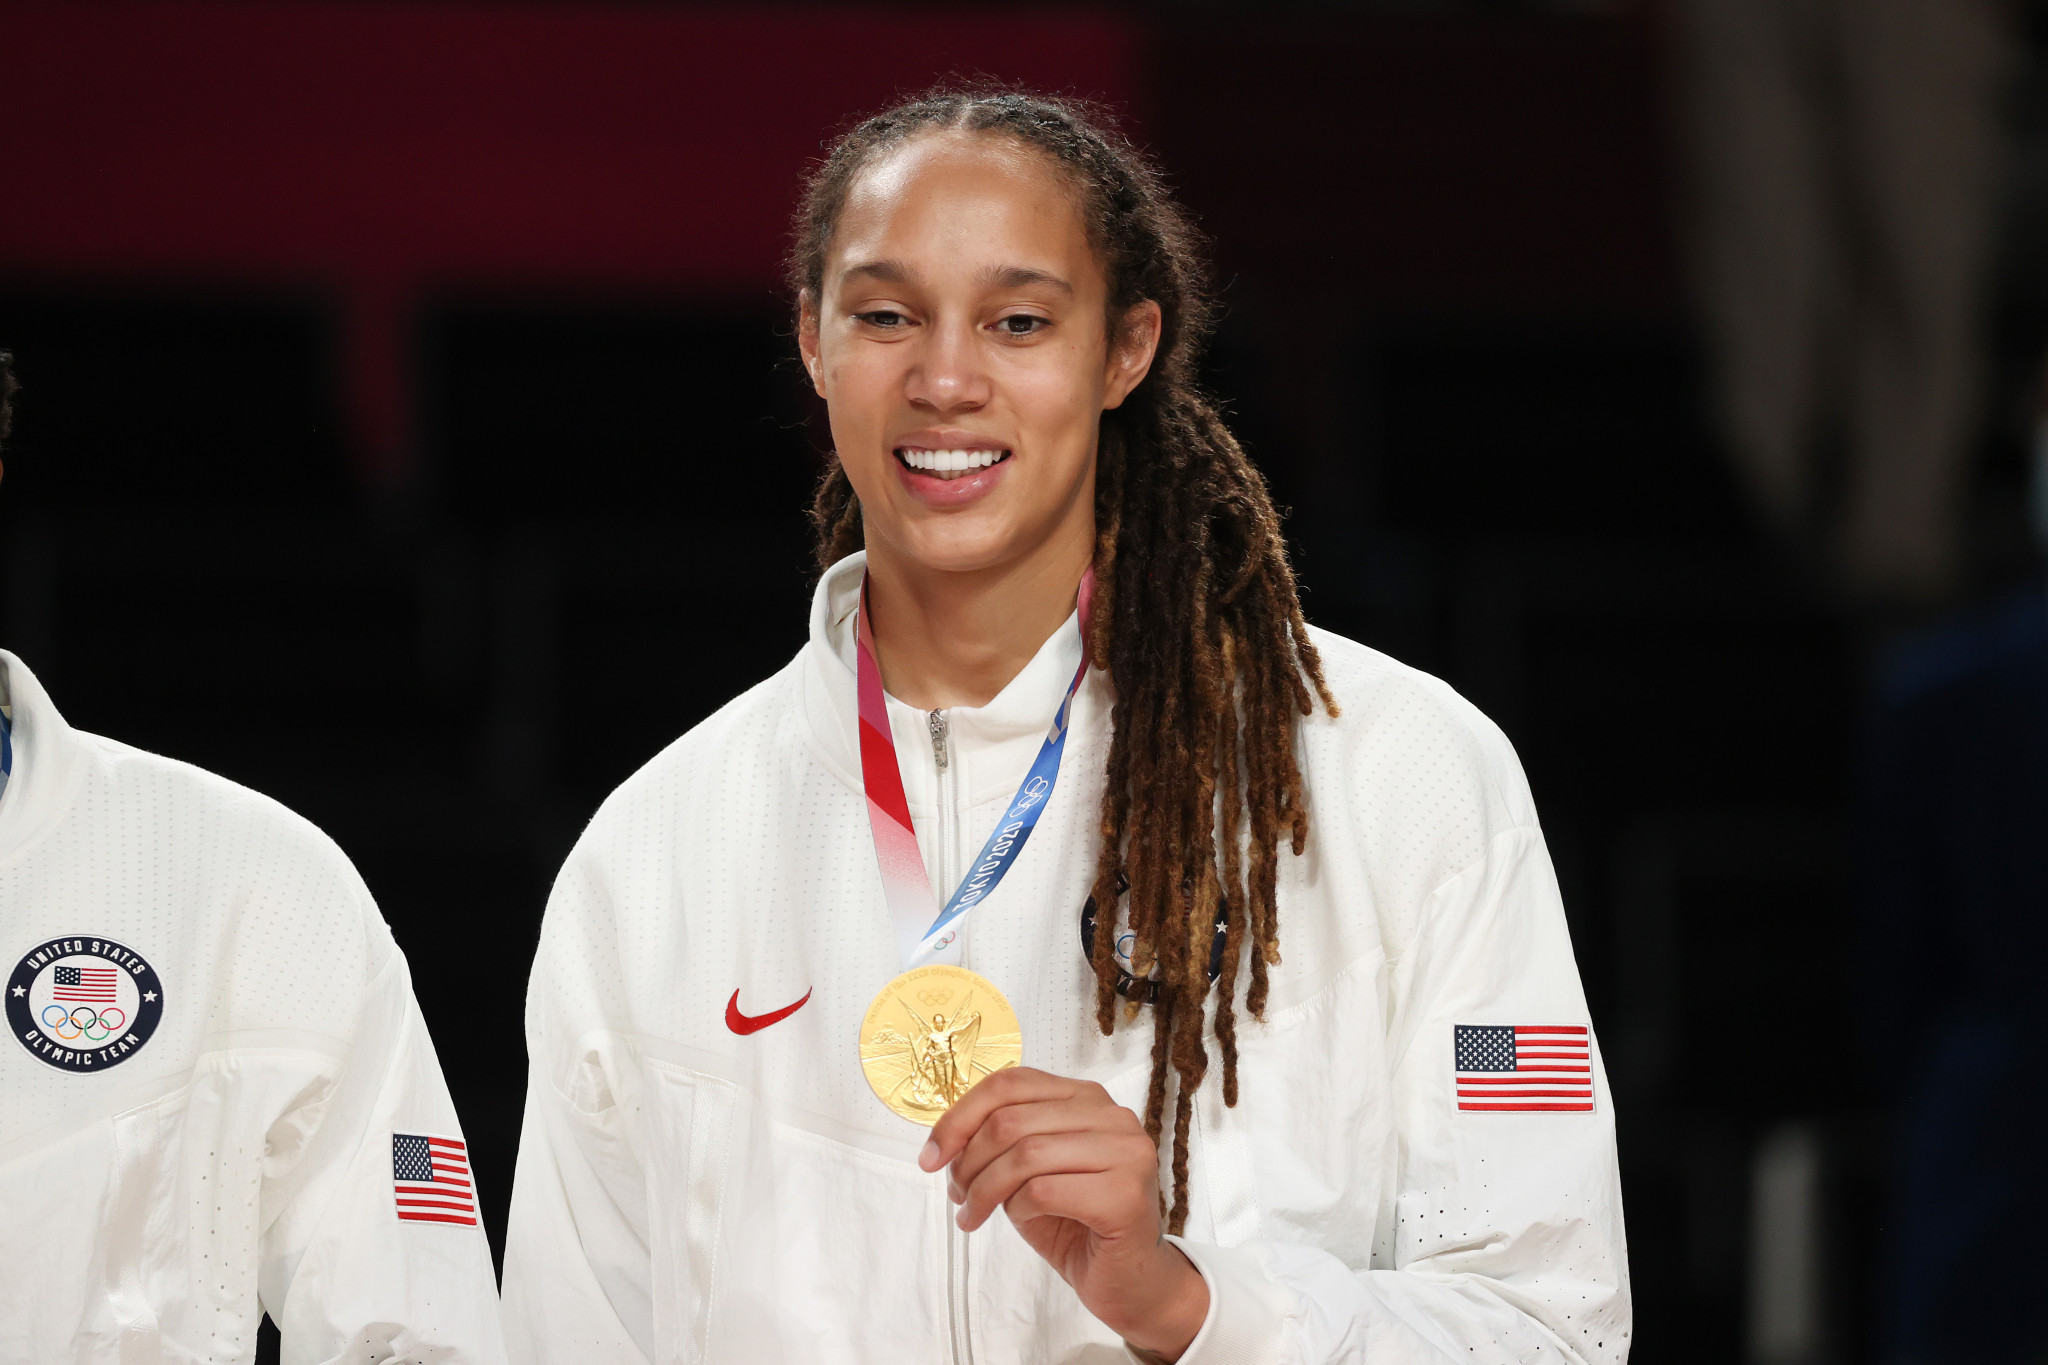 Rio 2016 and Tokyo 2020 gold medallist Brittney Griner faces up to 10 years in prison on drug smuggling charges ©Getty Images